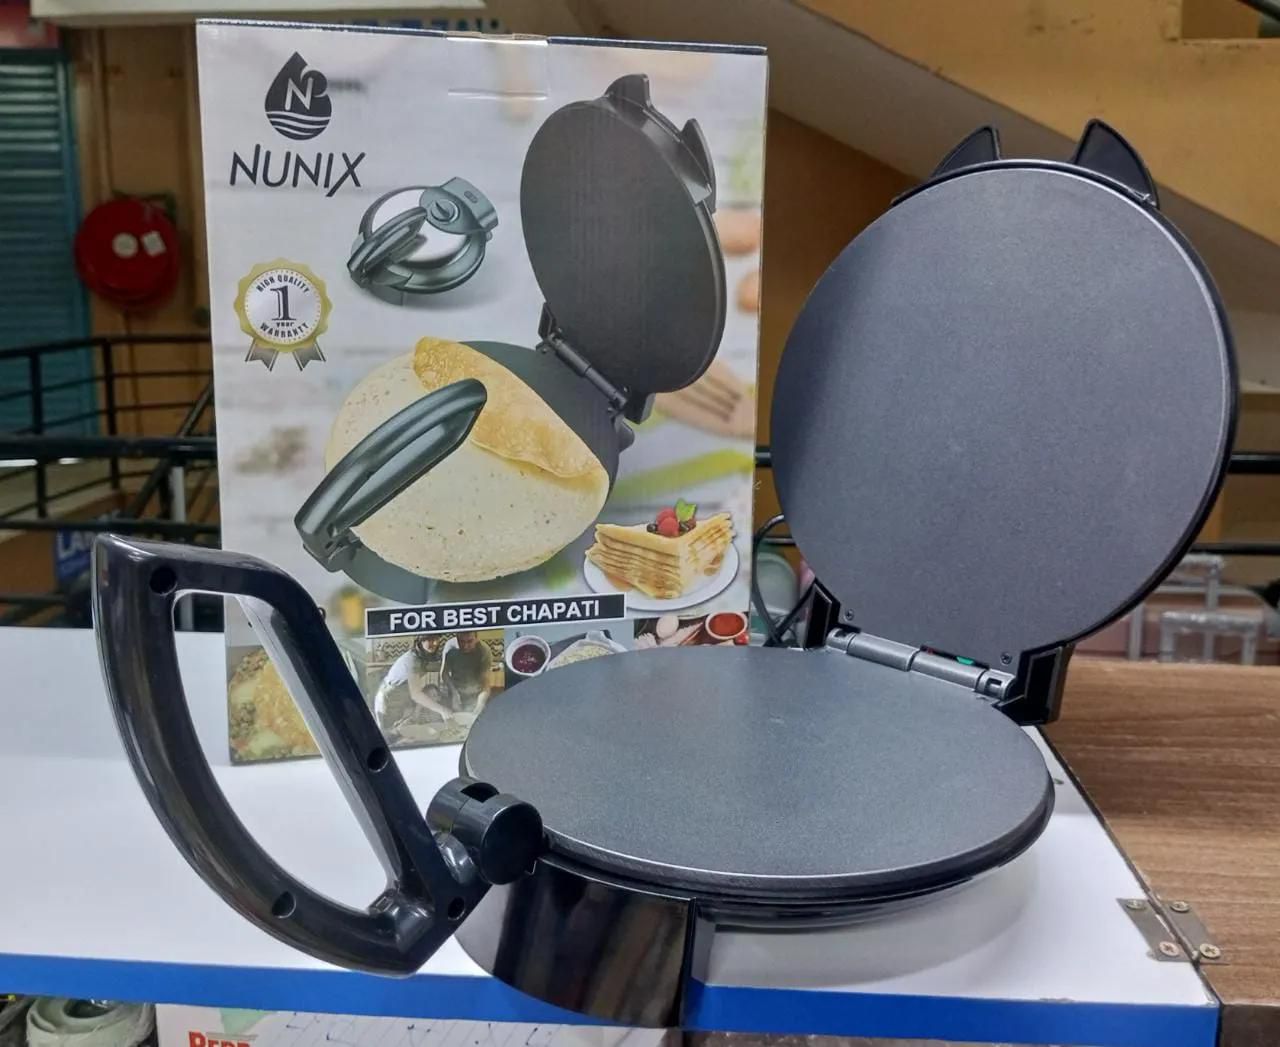 SPECIAL OFFER FOR TODAY ONLY!!!!NUNIX CHAPATI MAKER / ROTI MAKER NON STICK BAKING PLATE Black 1 Piece